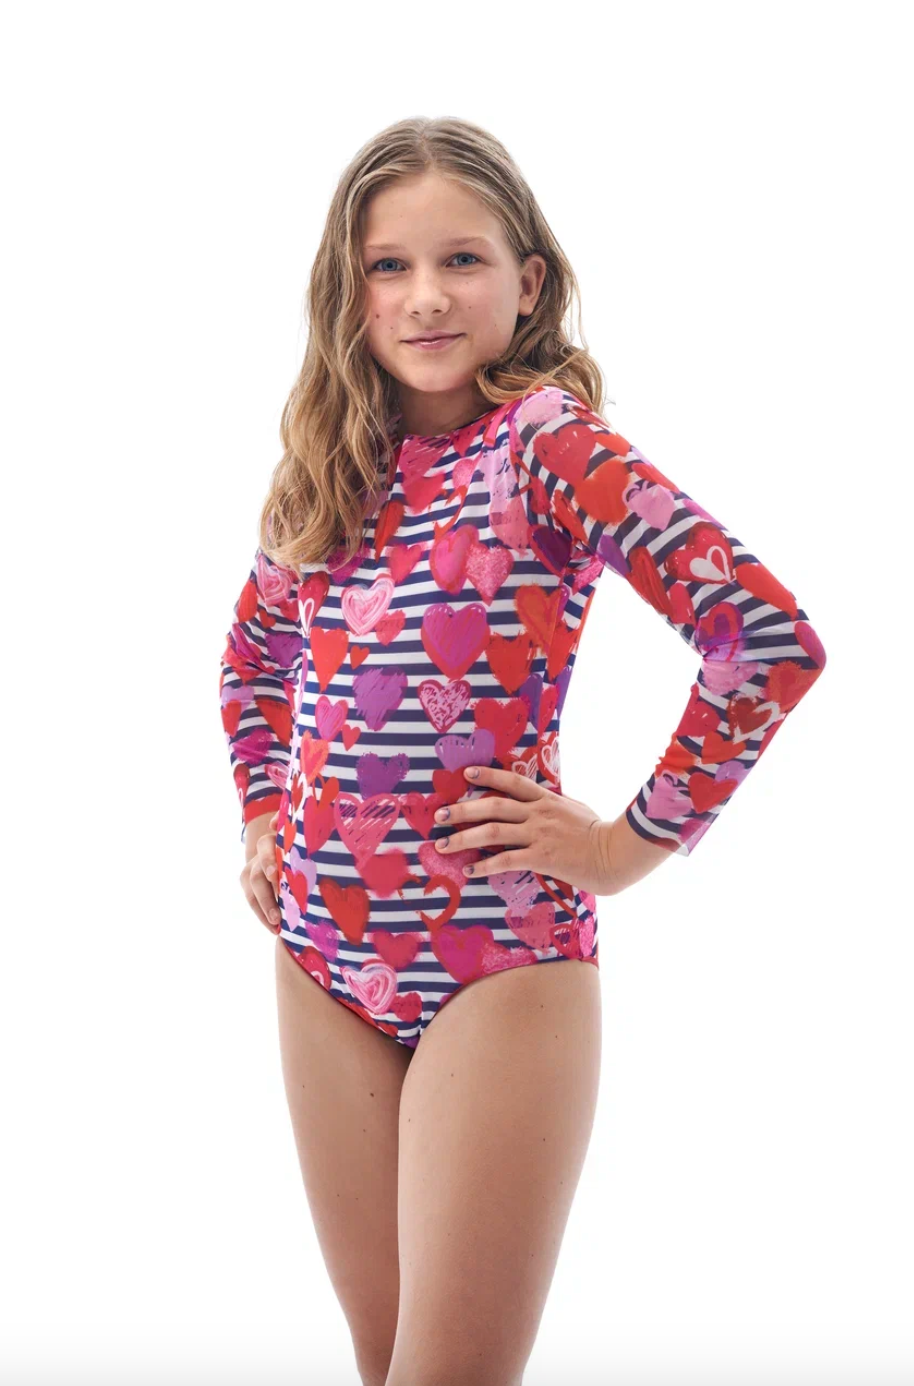 Explore our Stripes print kids swimsuits featuring SPF35 protection. This file highlights eco-friendly swimwear designed for classic luxury and safety, ensuring your child enjoys comfortable and stylish beachwear. Shop now!